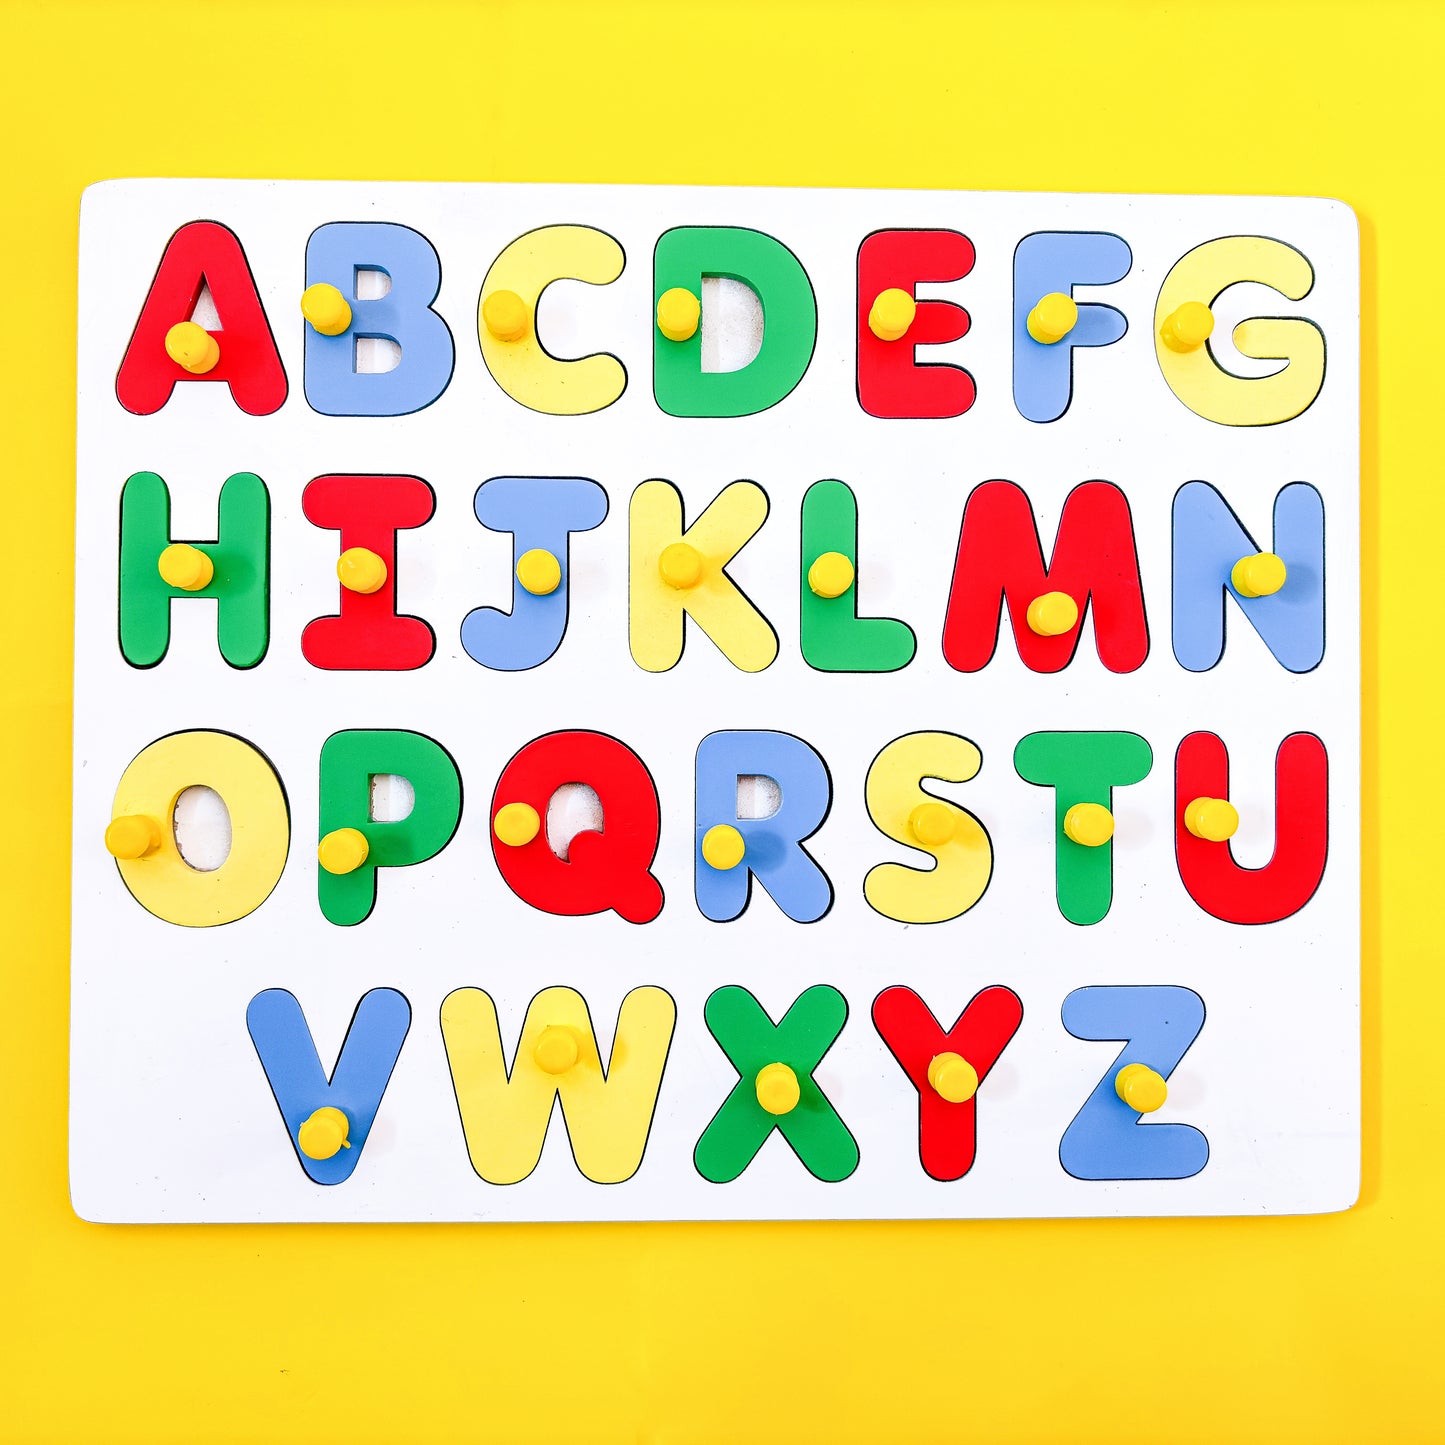 Colorful wooden alphabet puzzle with uppercase letters A to Z on a yellow background.  The puzzle pieces have knobs for easy grasping. This educational toy helps young children learn the alphabet and letter recognition. 